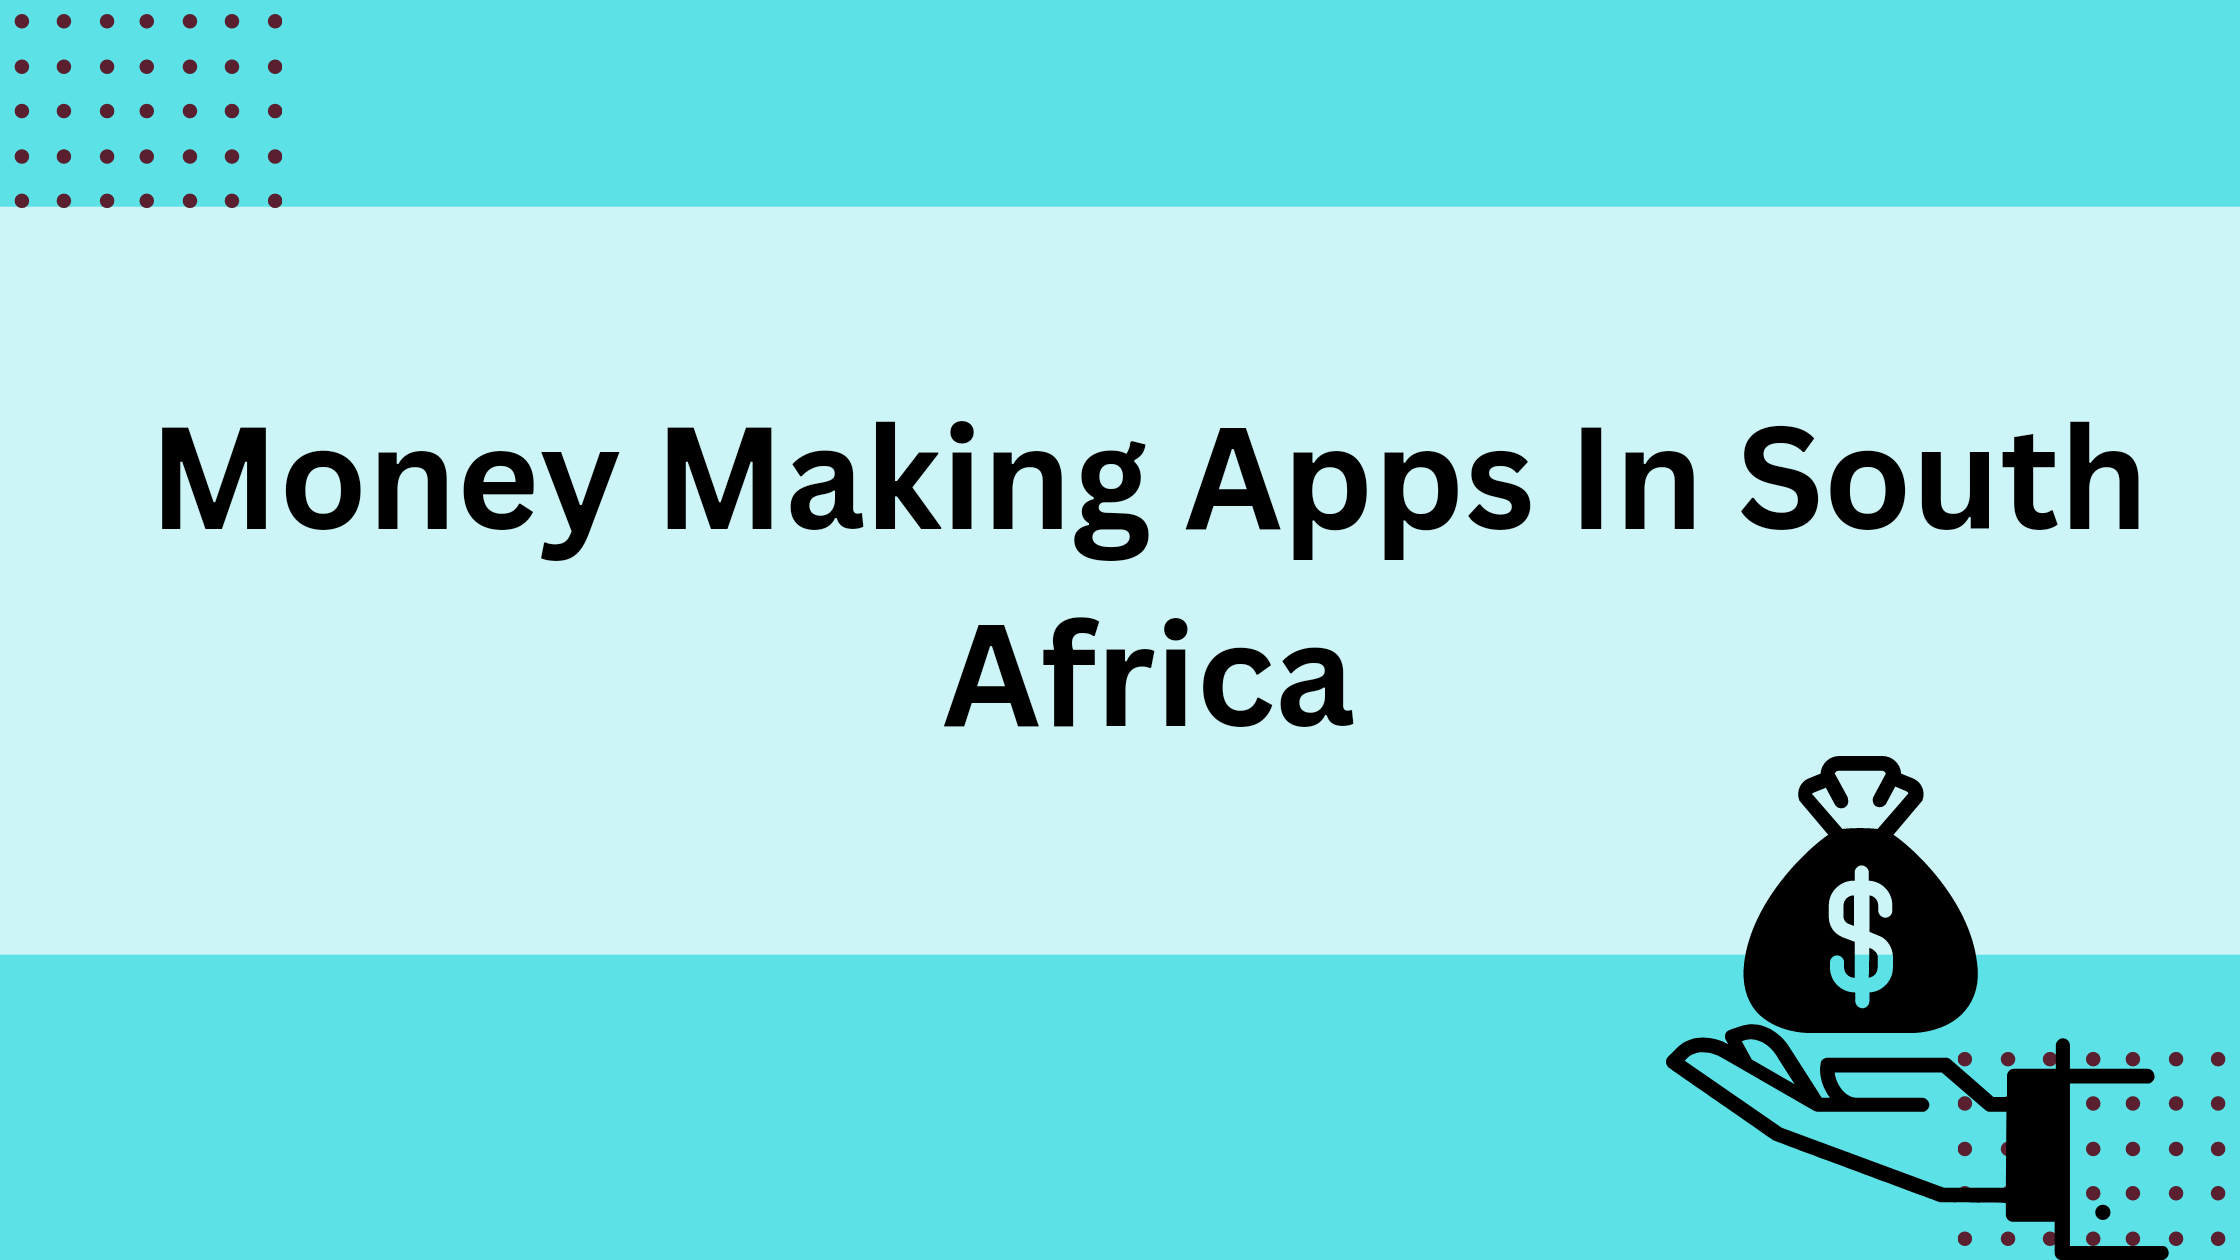 Money Making Apps In South Africa